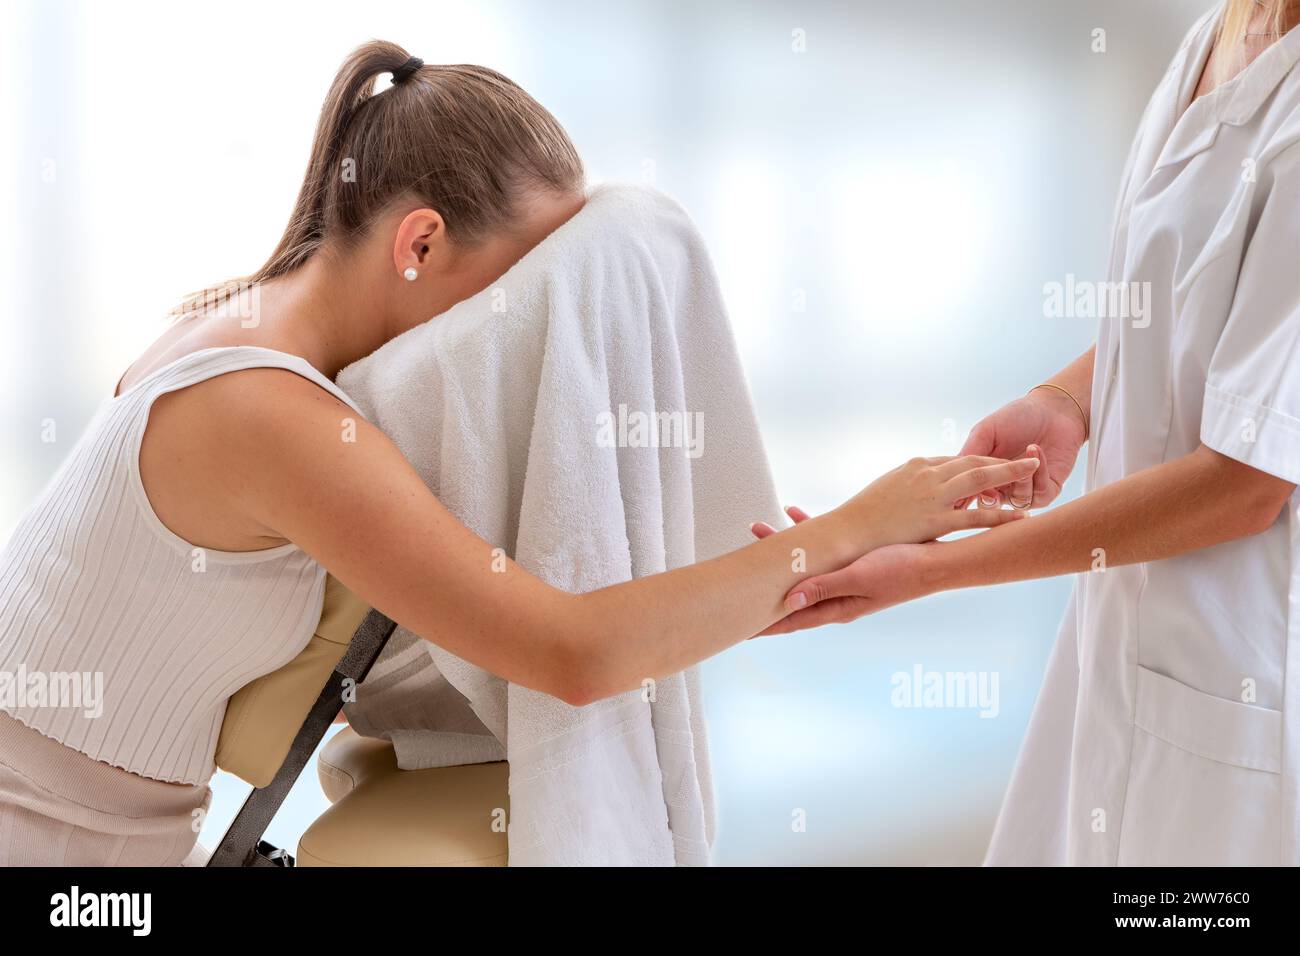 Stretching the fingers during a seated massage. Stock Photo